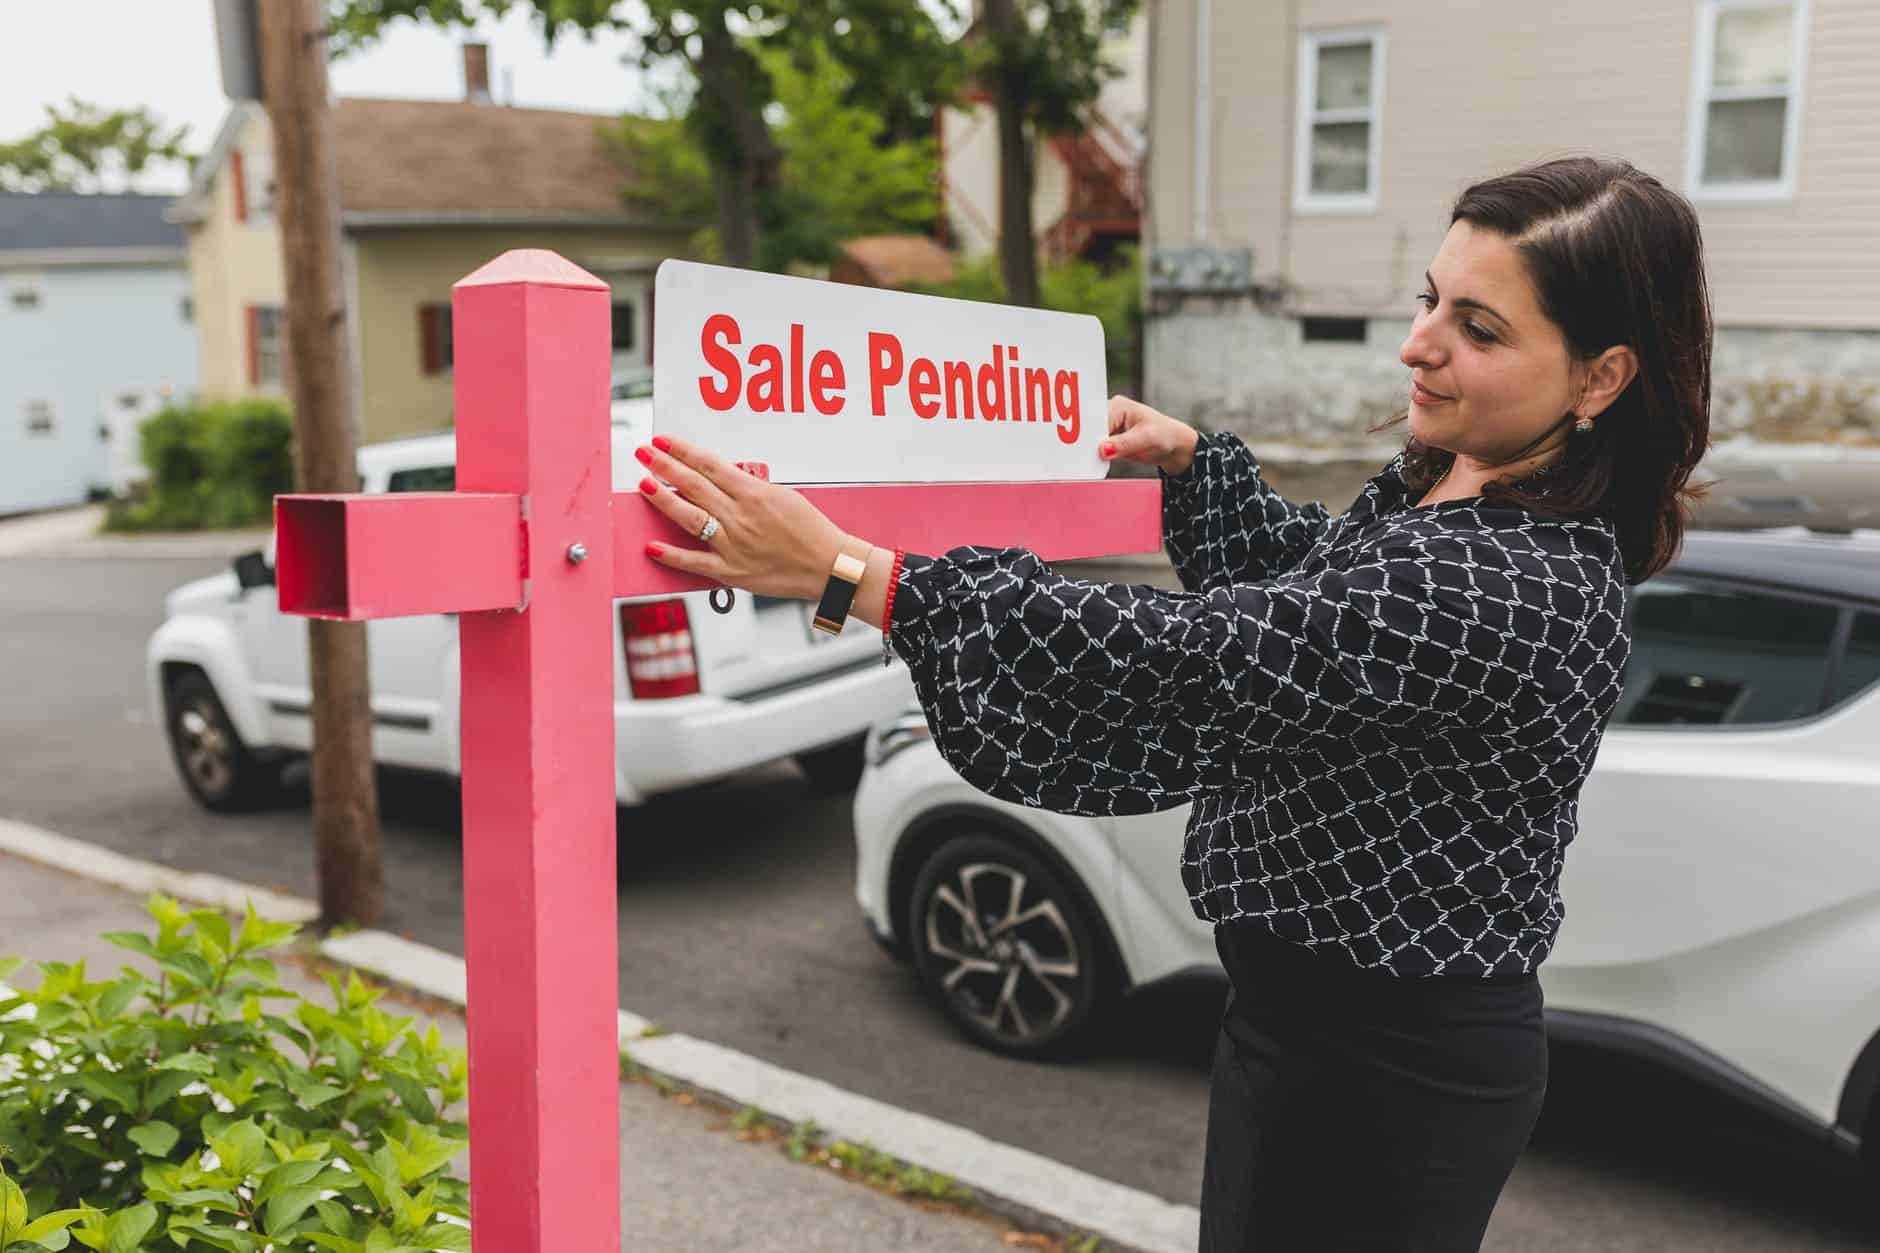 Woman placing a sale pending sign on a sign post with two cars behind her